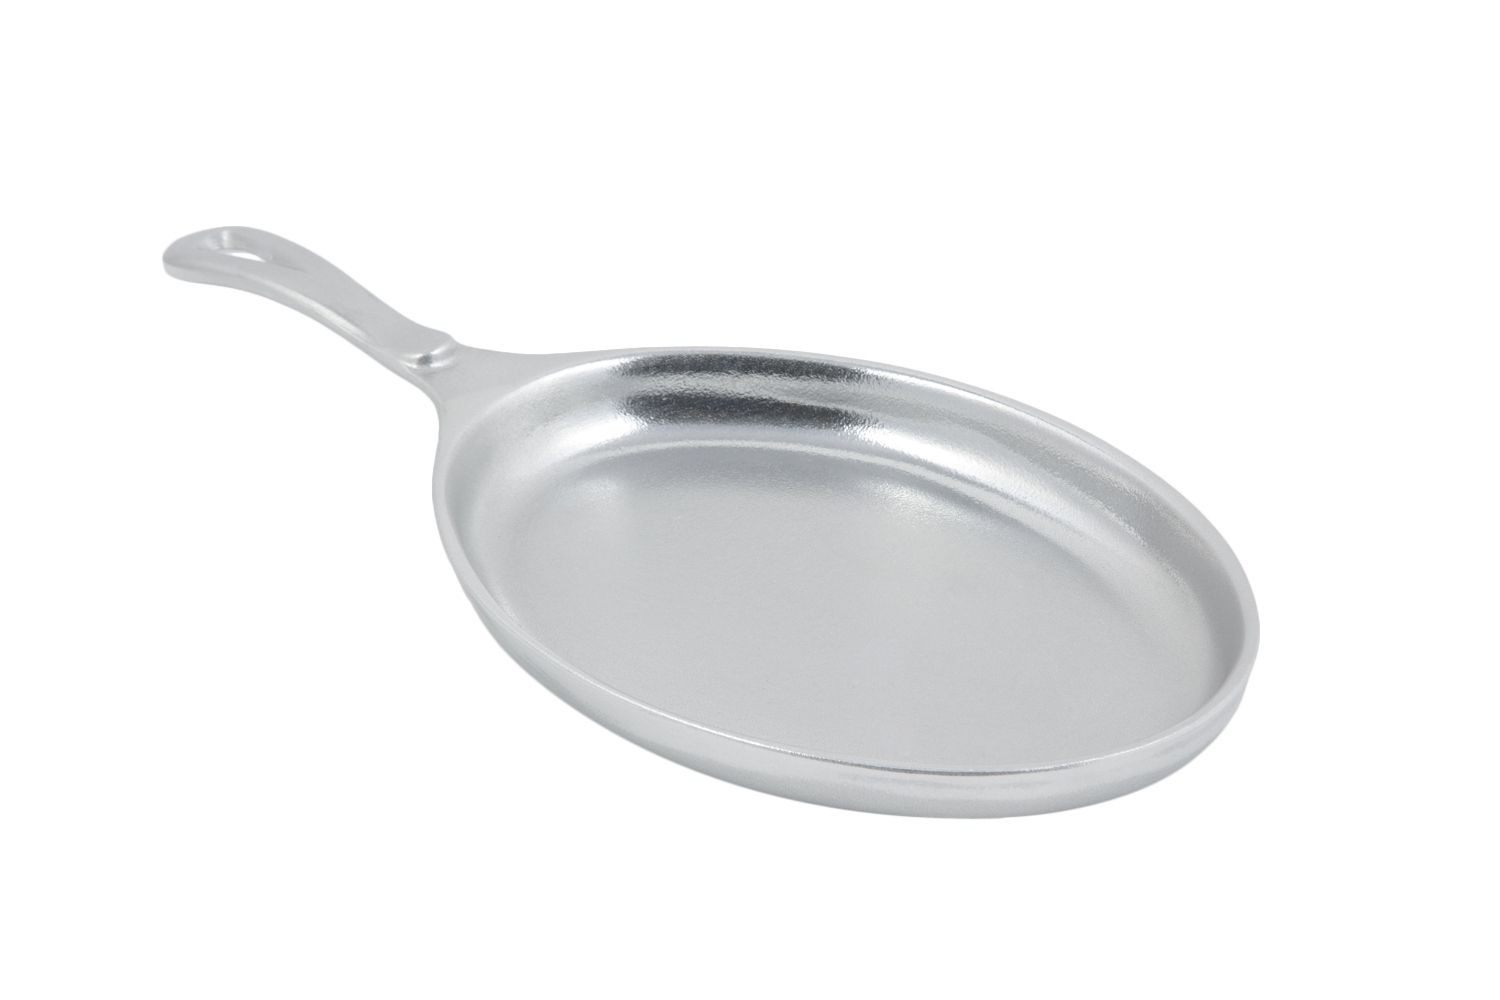 Bon Chef 5037P Oval Skillet, Pewter Glo 7 1/8" x 9 7/8", Set of 6